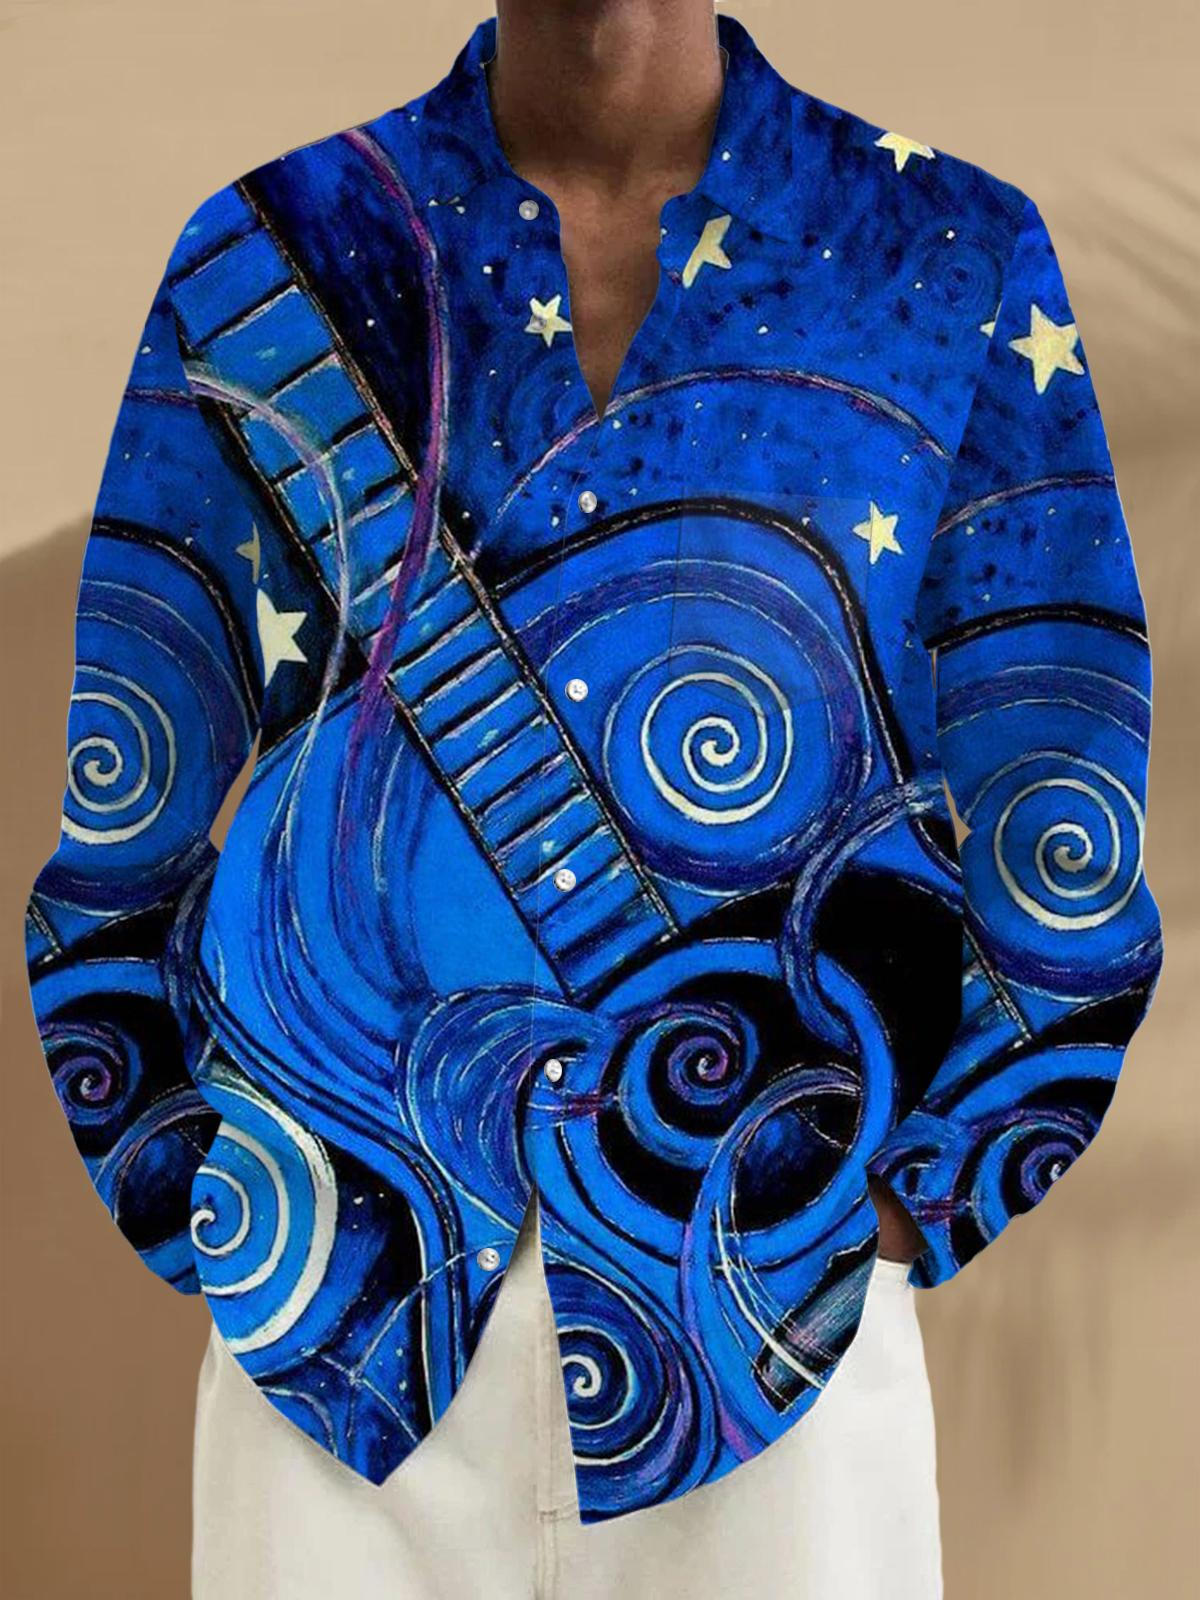 Musical Instrument Star Print Long Sleeve Men's Shirts With Pocket